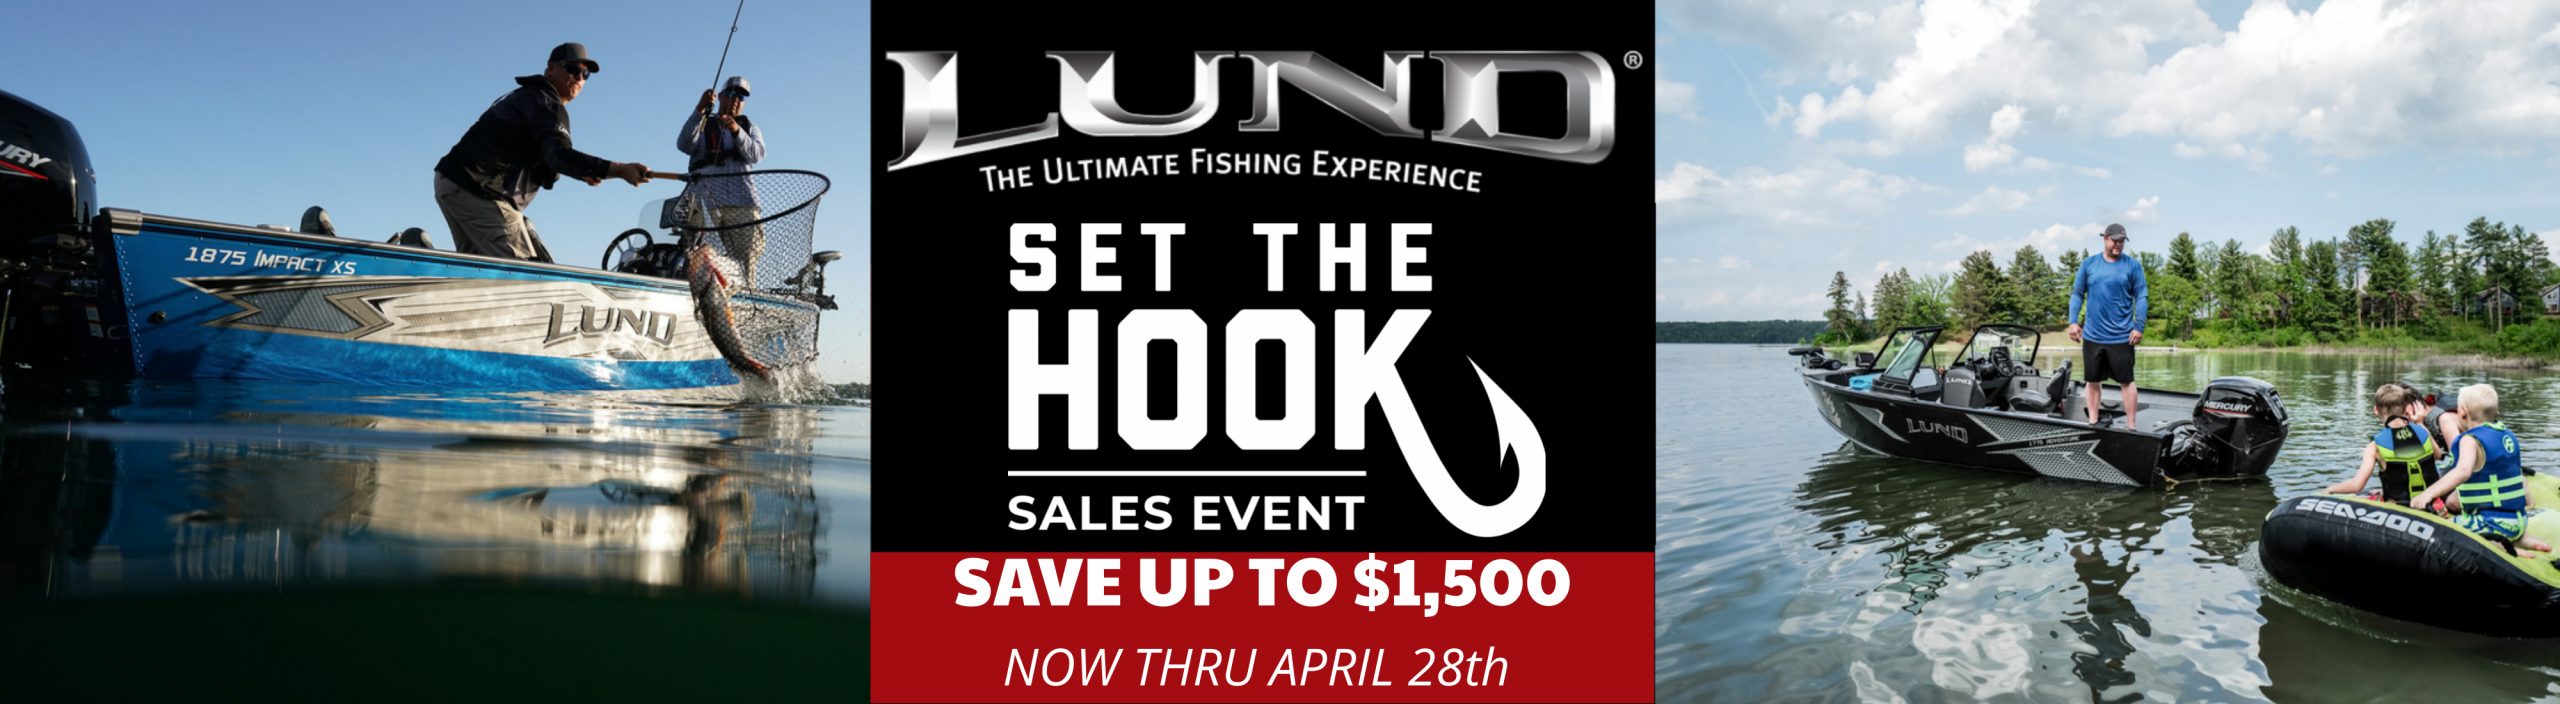 Lund Set The Hook Sales Event